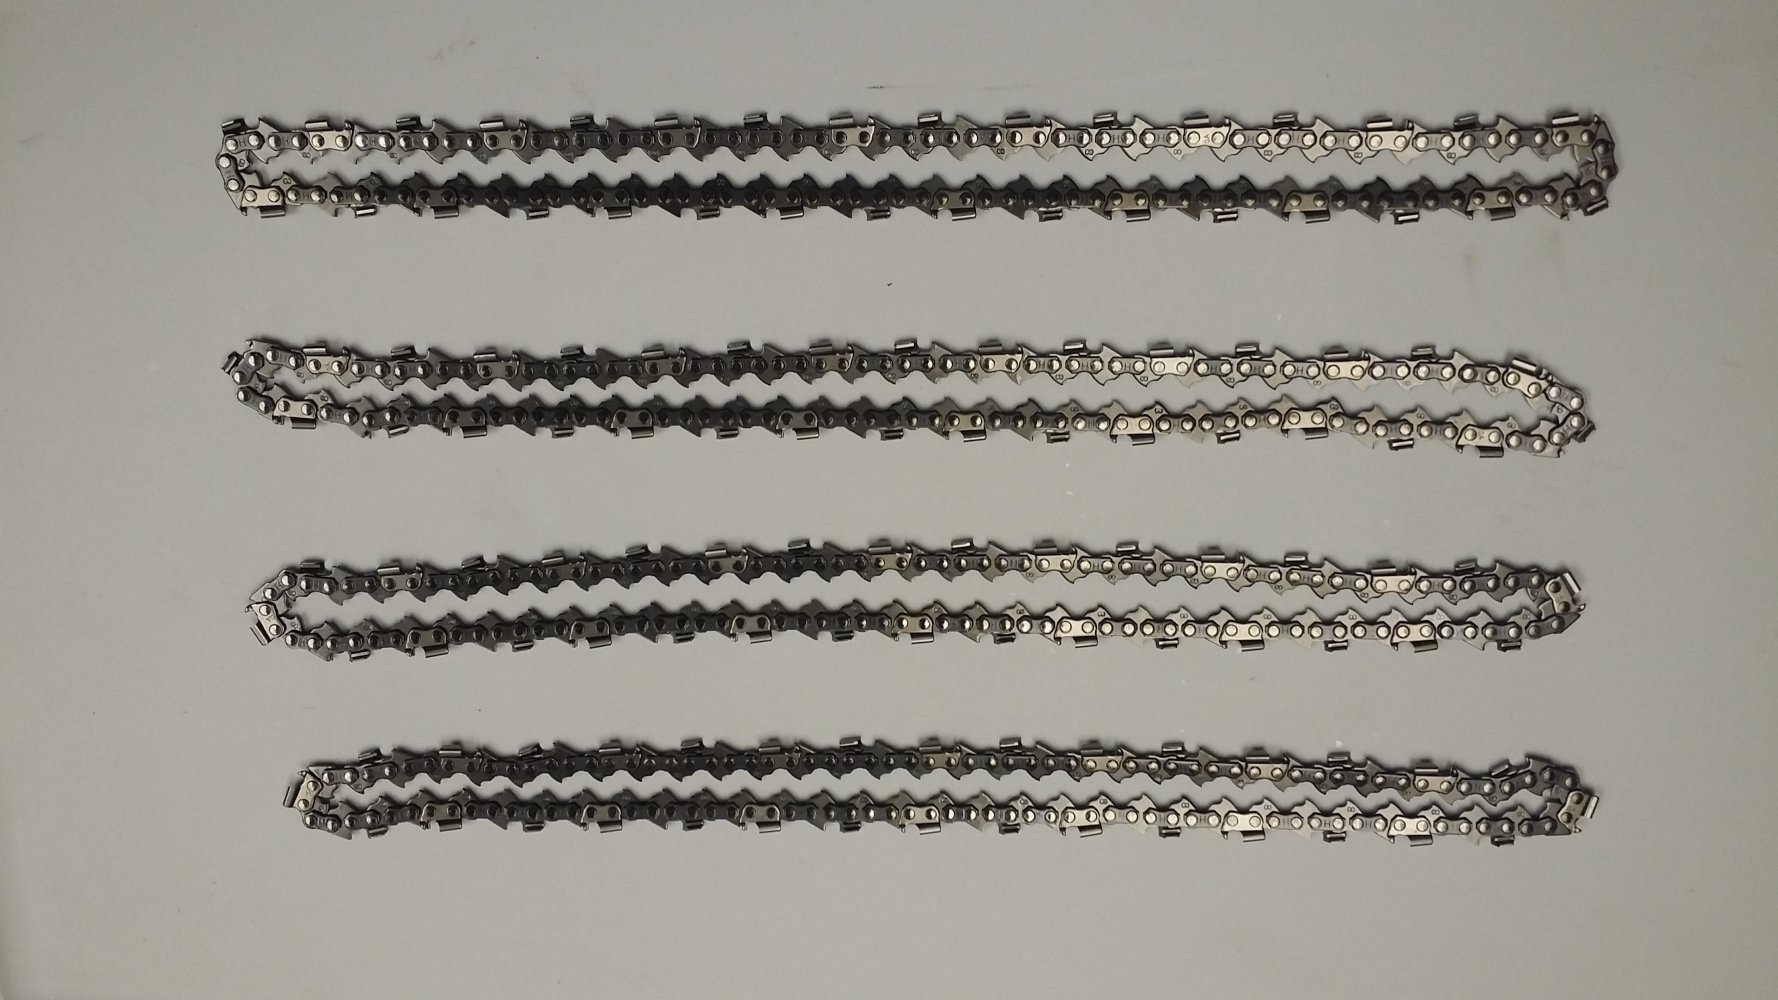 579623301 64 drive link 4 Chainsaw Carving Chain 25AP065G 